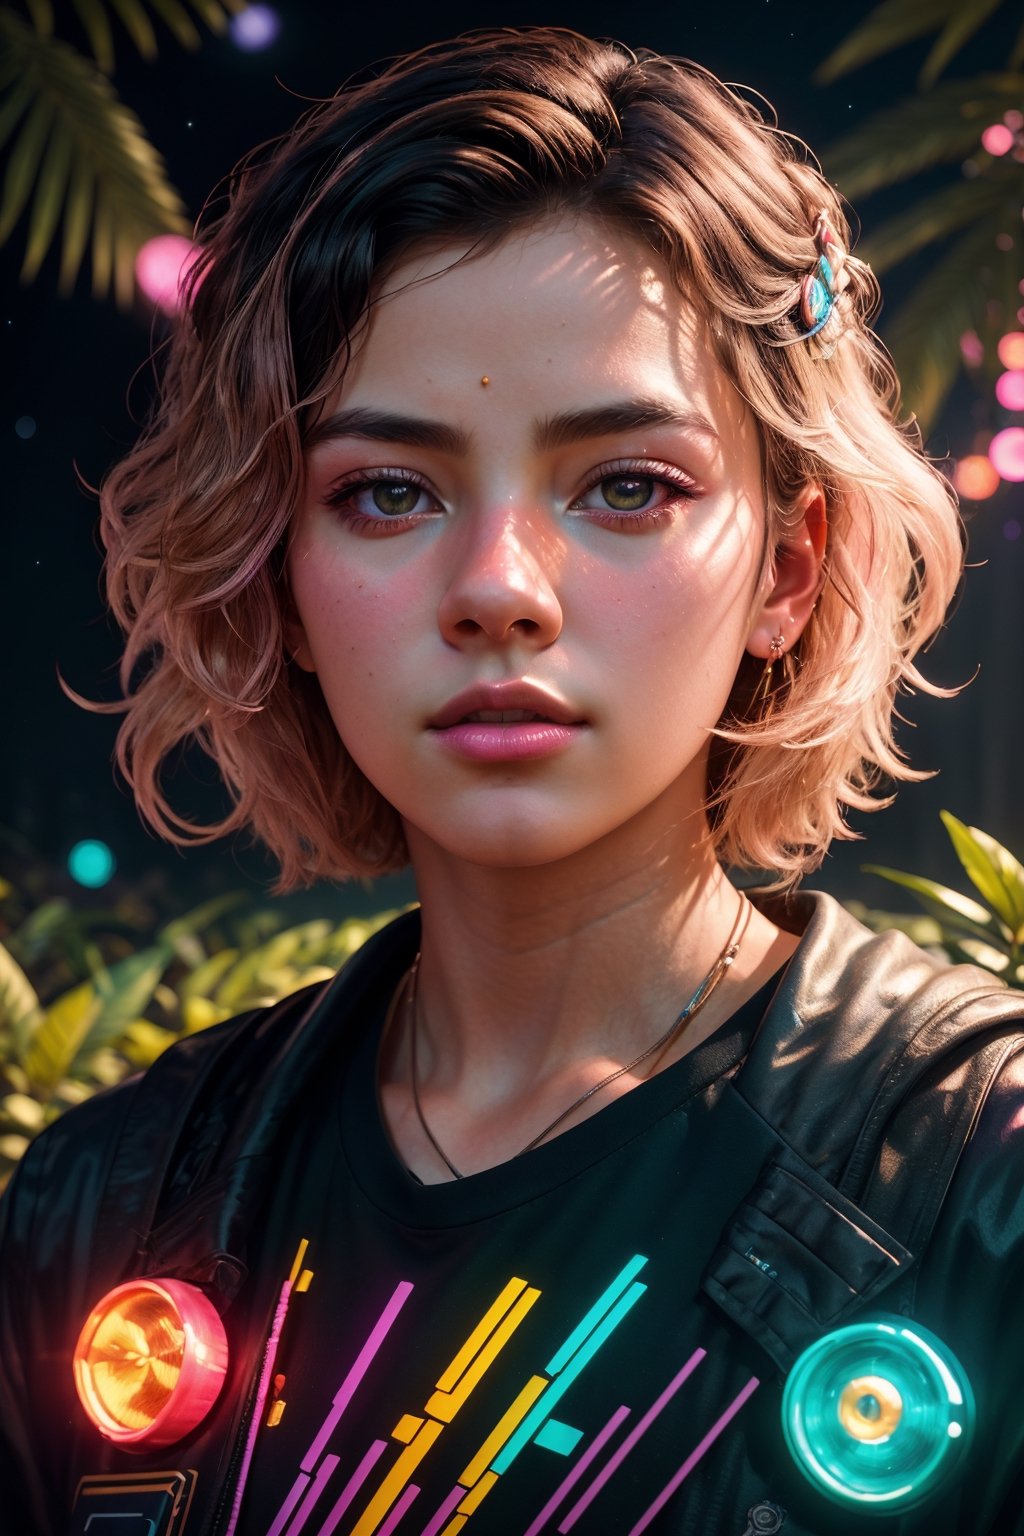 (best quality, 8K, ultra-detailed, masterpiece), (ultra-realistic, photorealistic), A mesmerizing 8K portrait capturing the essence of a solitary boy in a close-up view, his gaze fixed afar, set against the backdrop of a synthwave art style poster. The scene is adorned with lush palm leaves and delicate white flowers, adding an intriguing geometric pattern to the composition. The entire setting is bathed in a neon yellow glow, reminiscent of the synthwave aesthetic, against a dark, starry night sky illuminated by bioluminescent elements. This artwork radiates fortitude and wholesome beauty, inviting you to immerse yourself in its unique and captivating world.